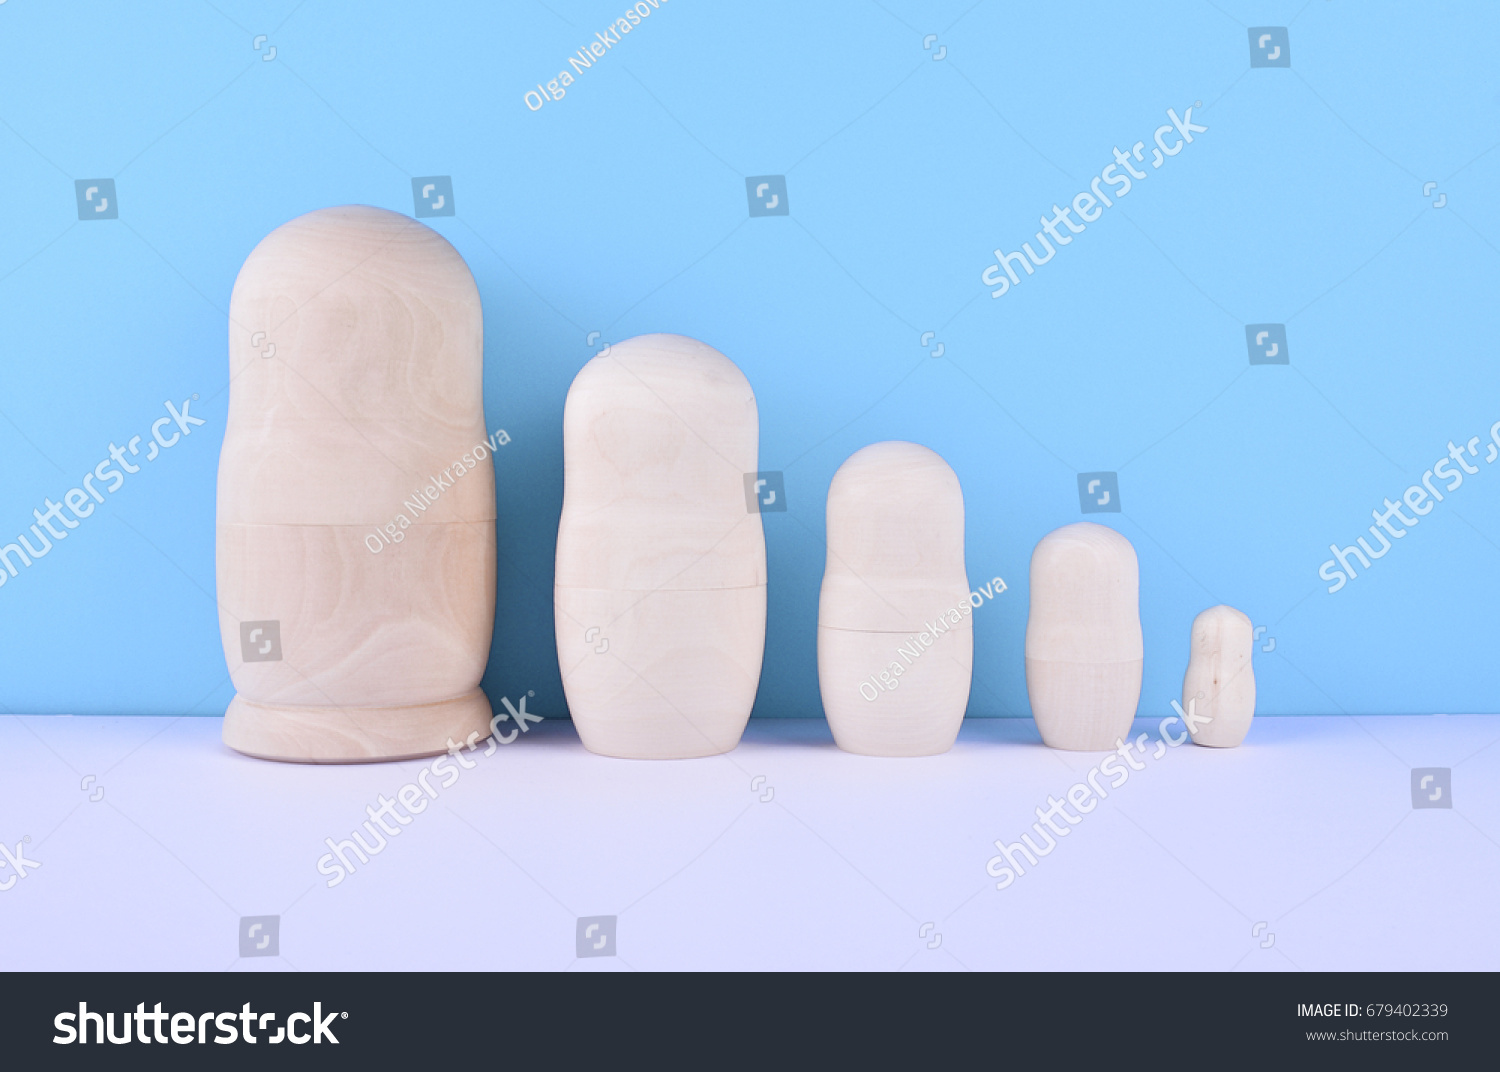 Wooden unpainted russian nested dolls (matryoshka) on blue background. Family concept. #679402339